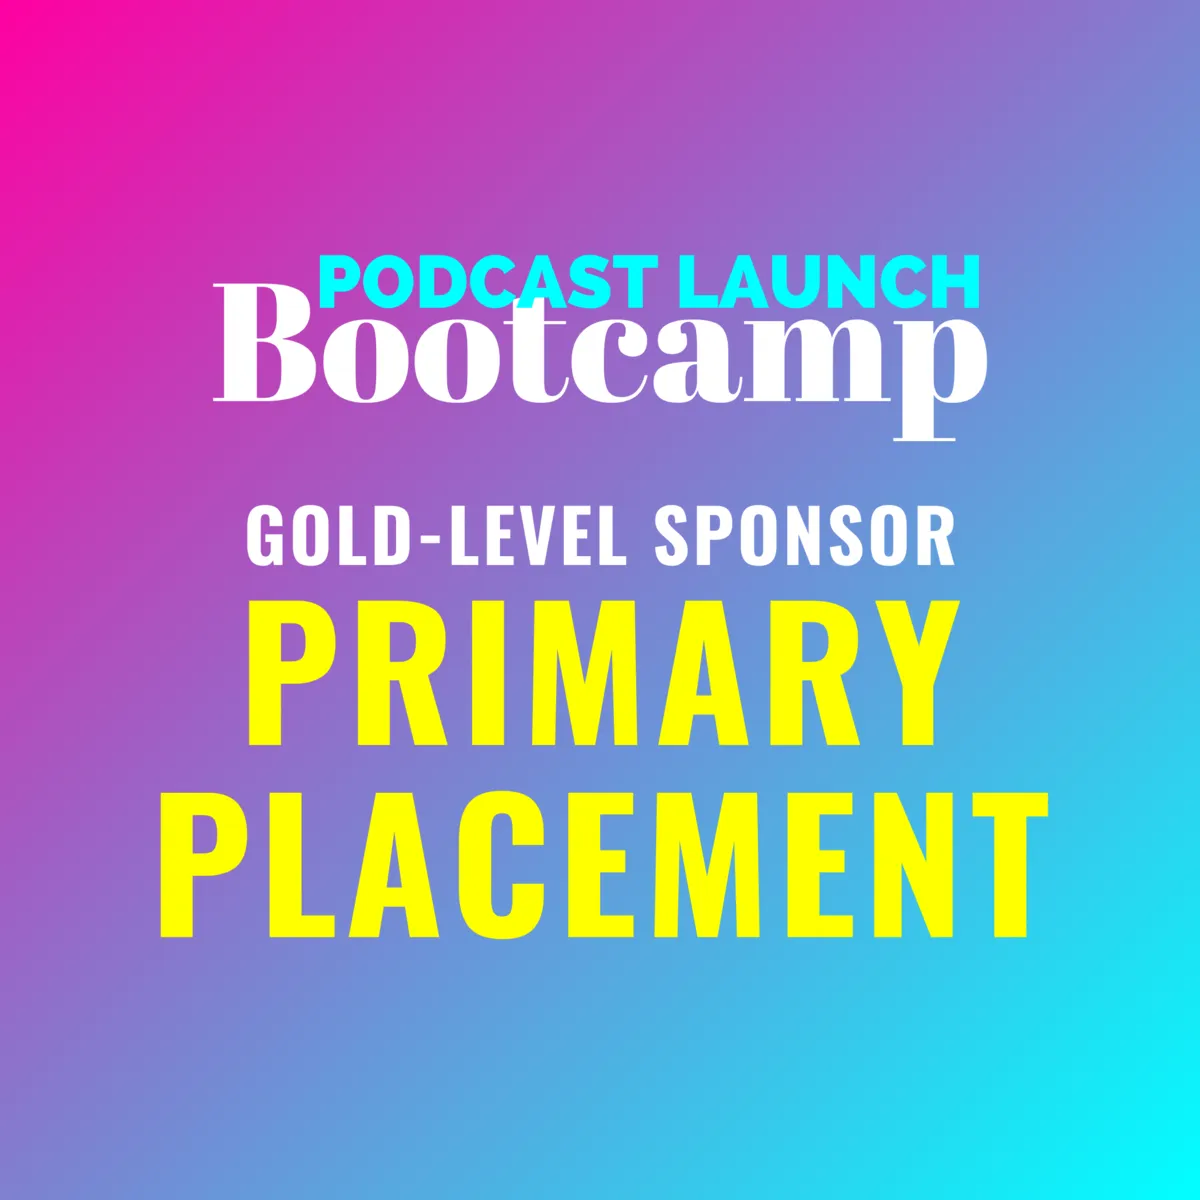 Gold-Level Sponsor Primary Placement: Podcast Launch Bootcamp